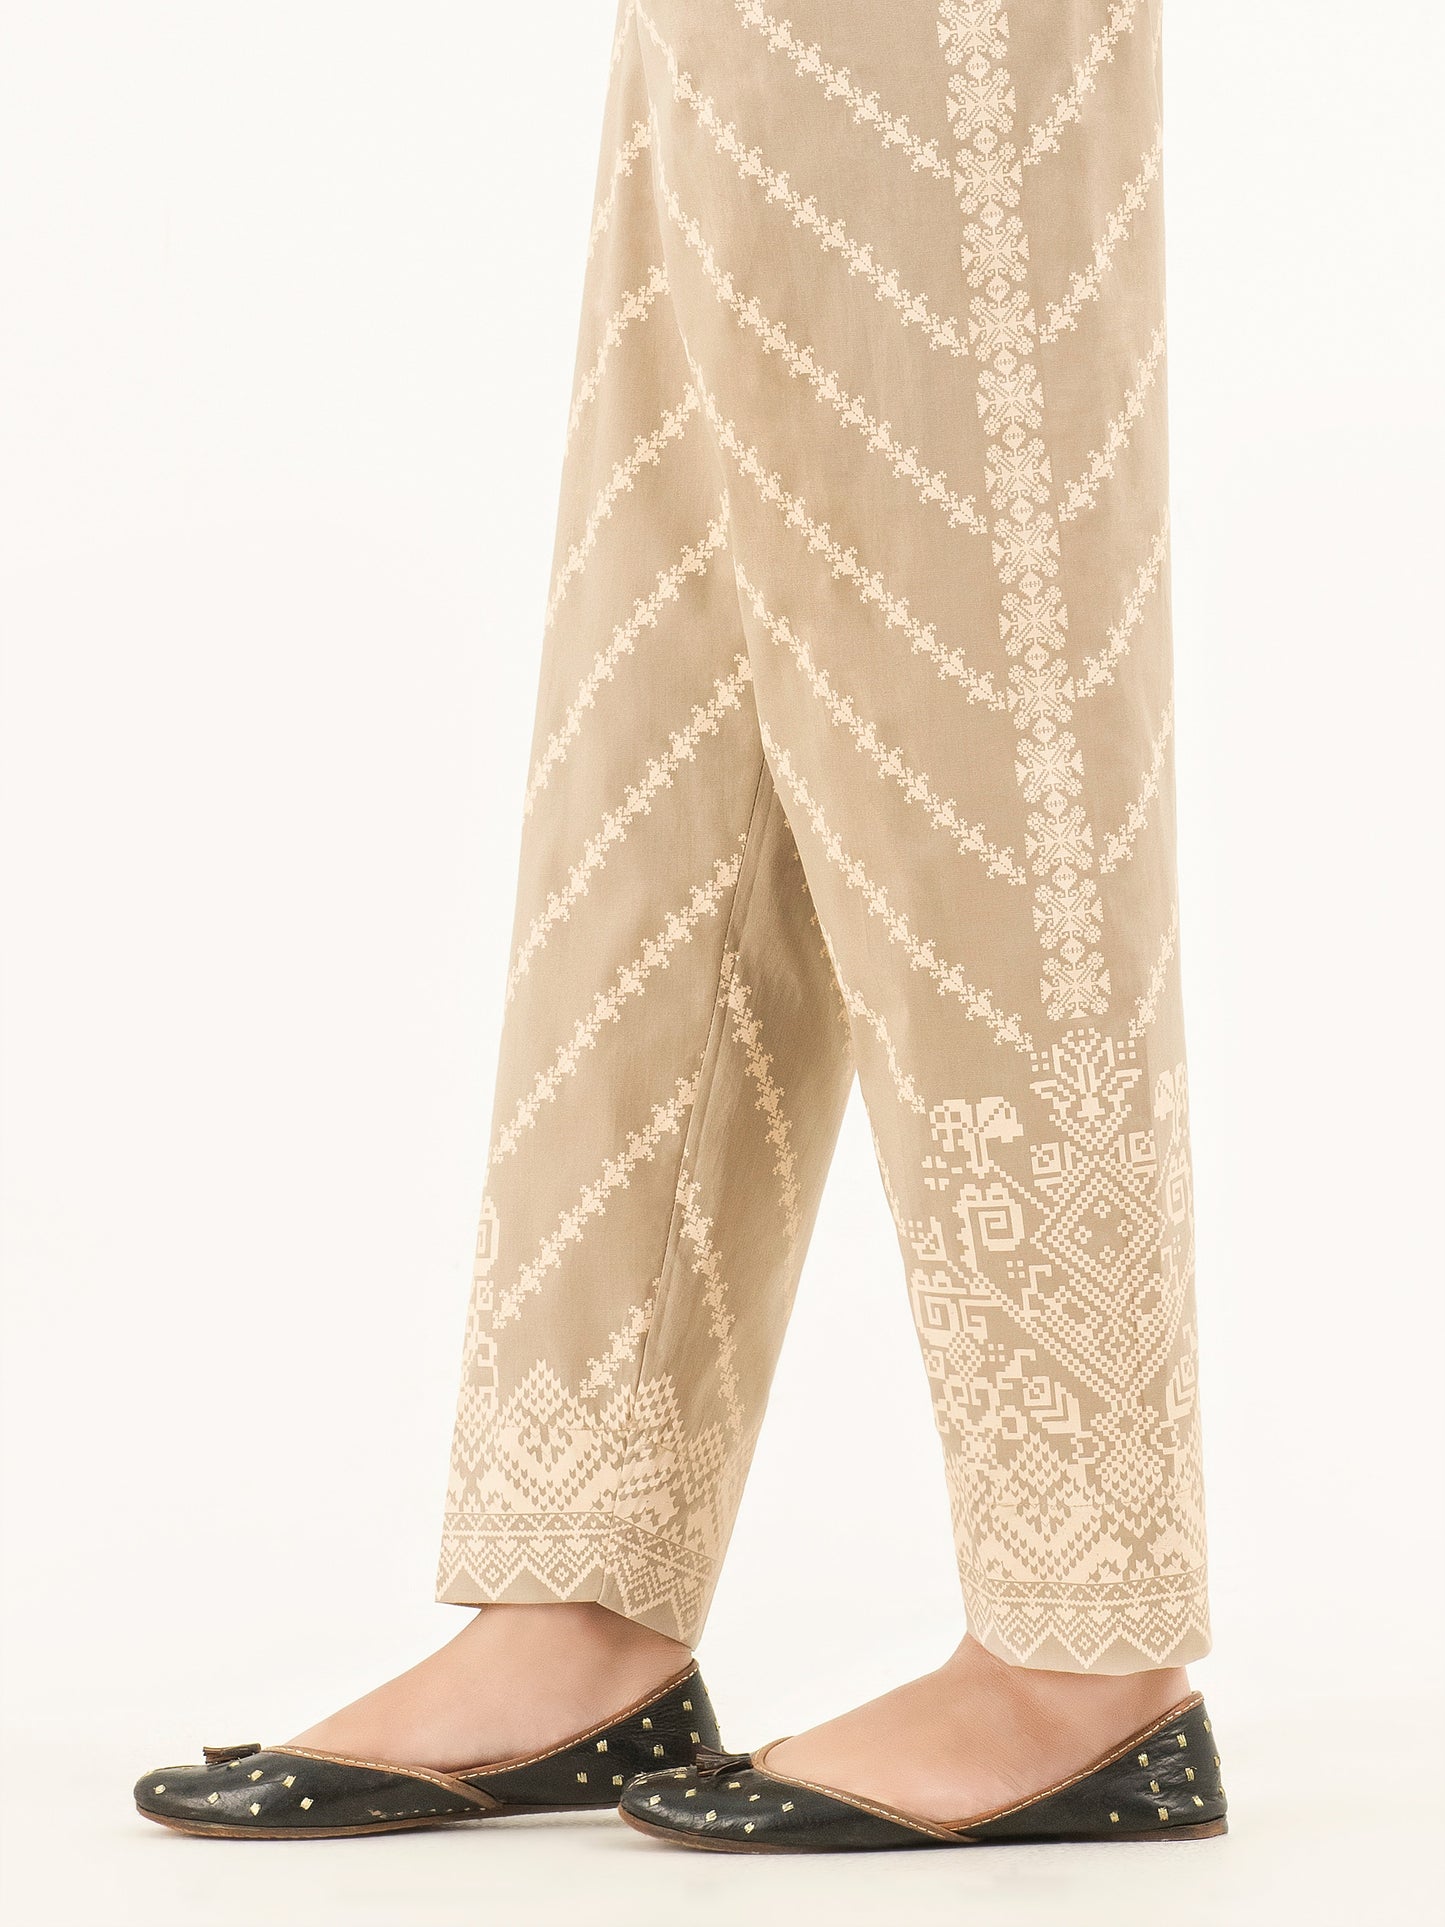 Pasted Winter Cotton Trousers